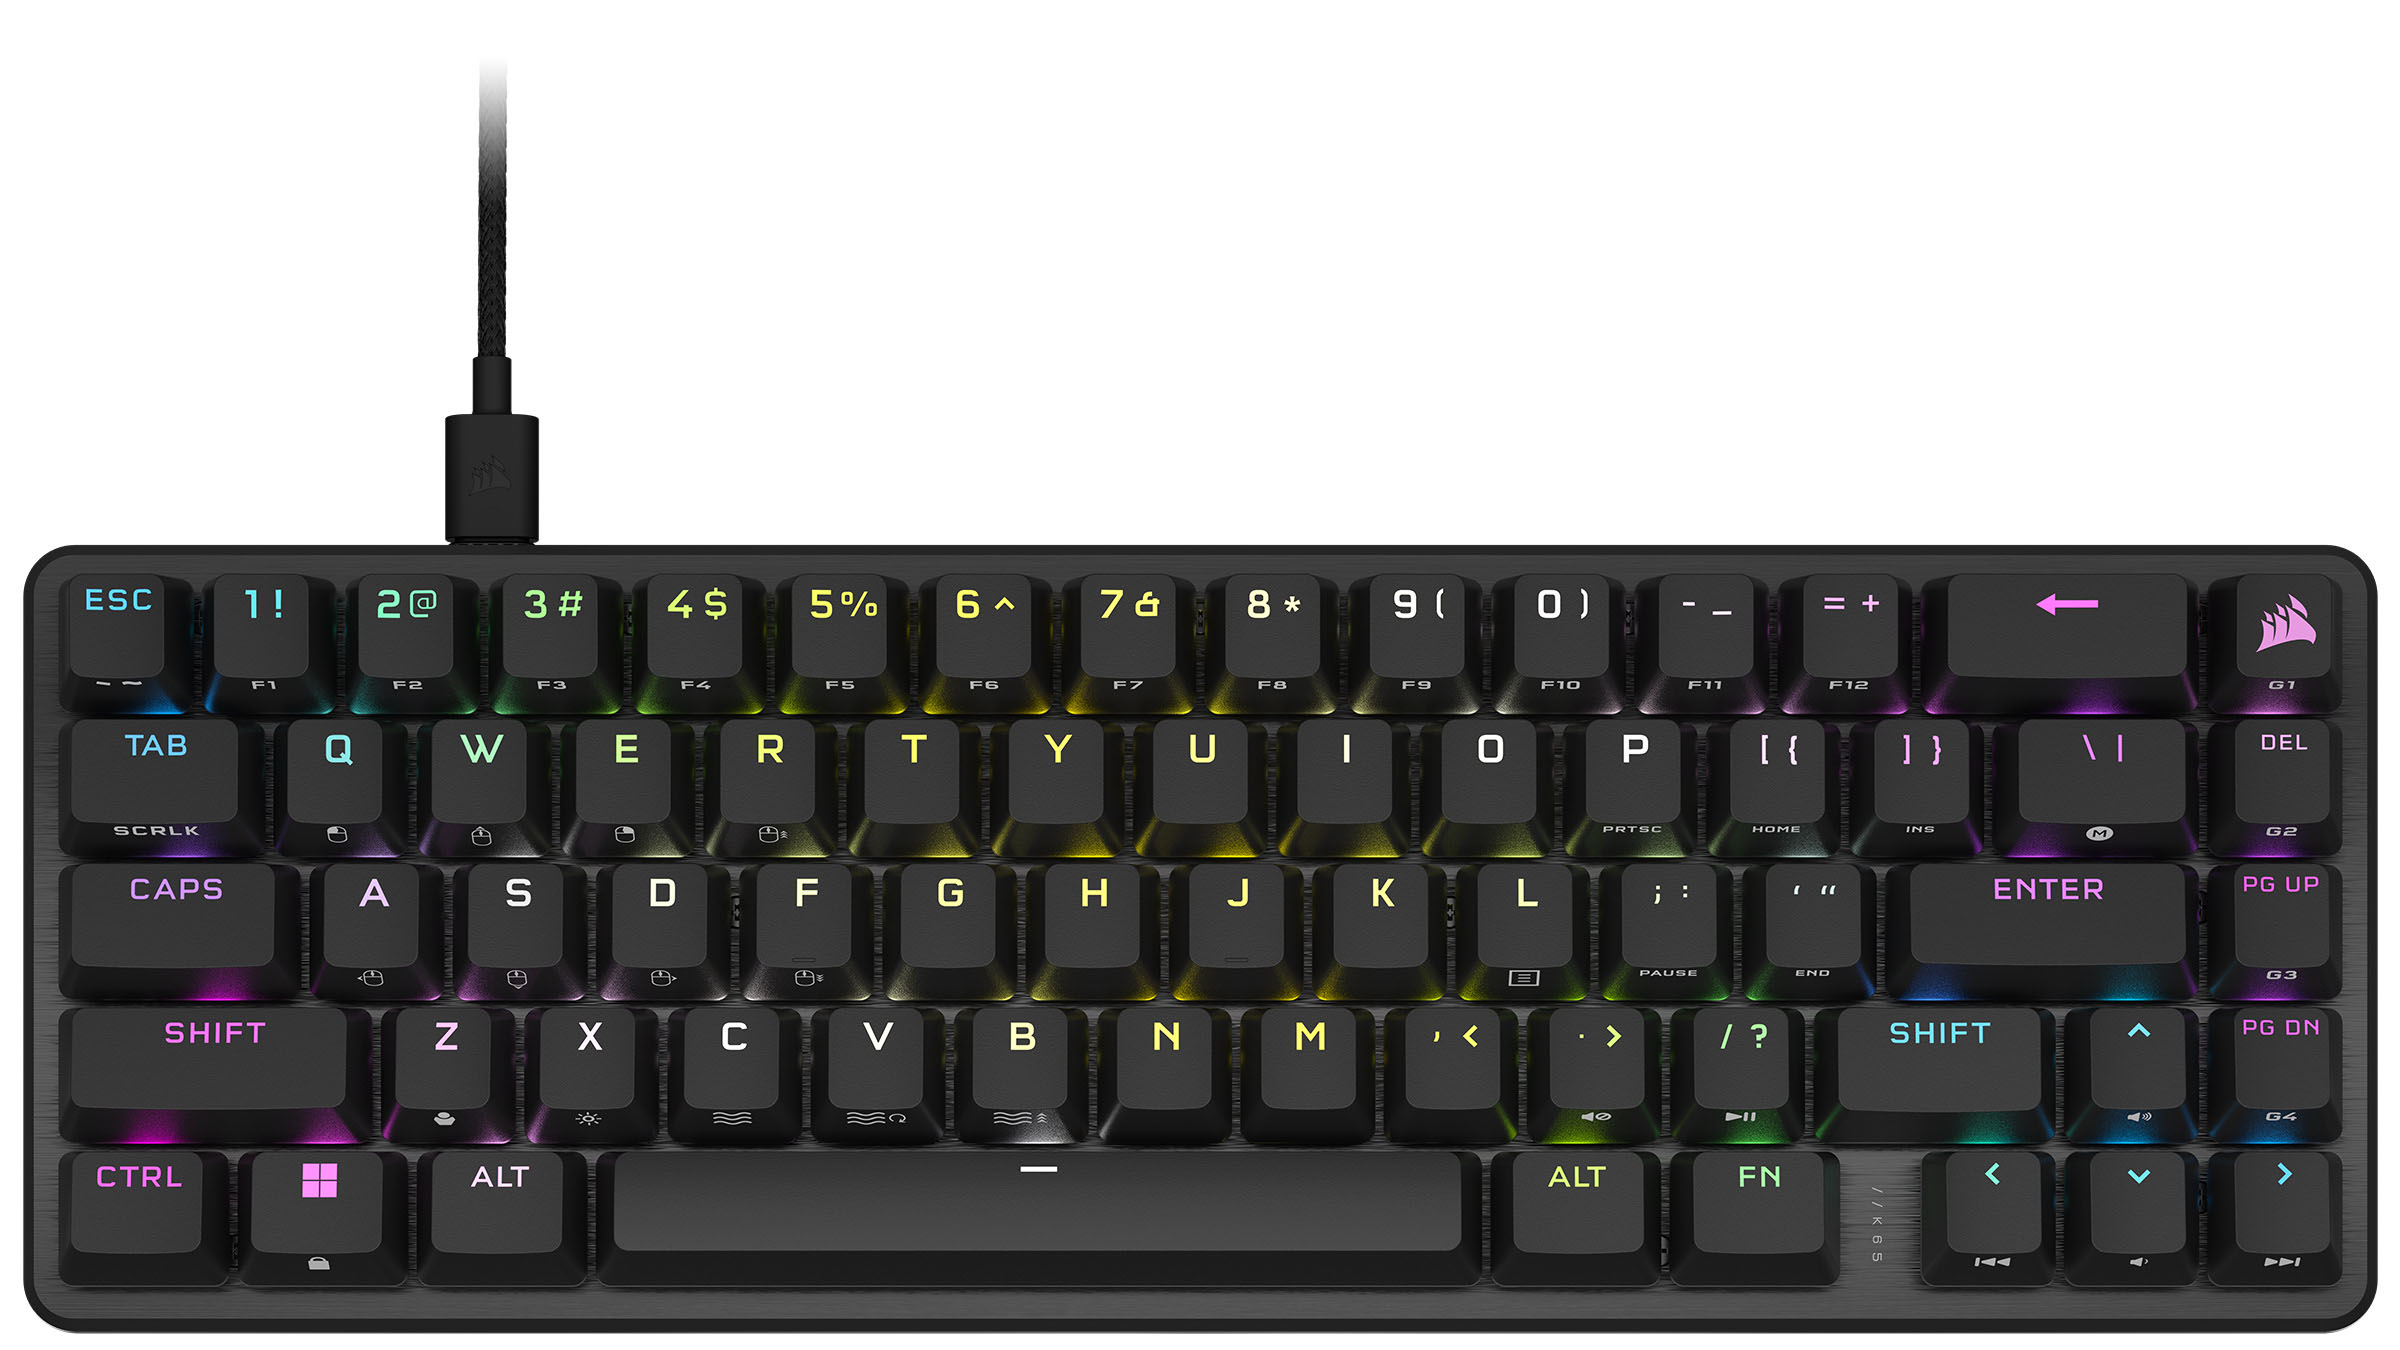 The Corsair K55 RGB Pro Gaming Keyboard is only £40 at